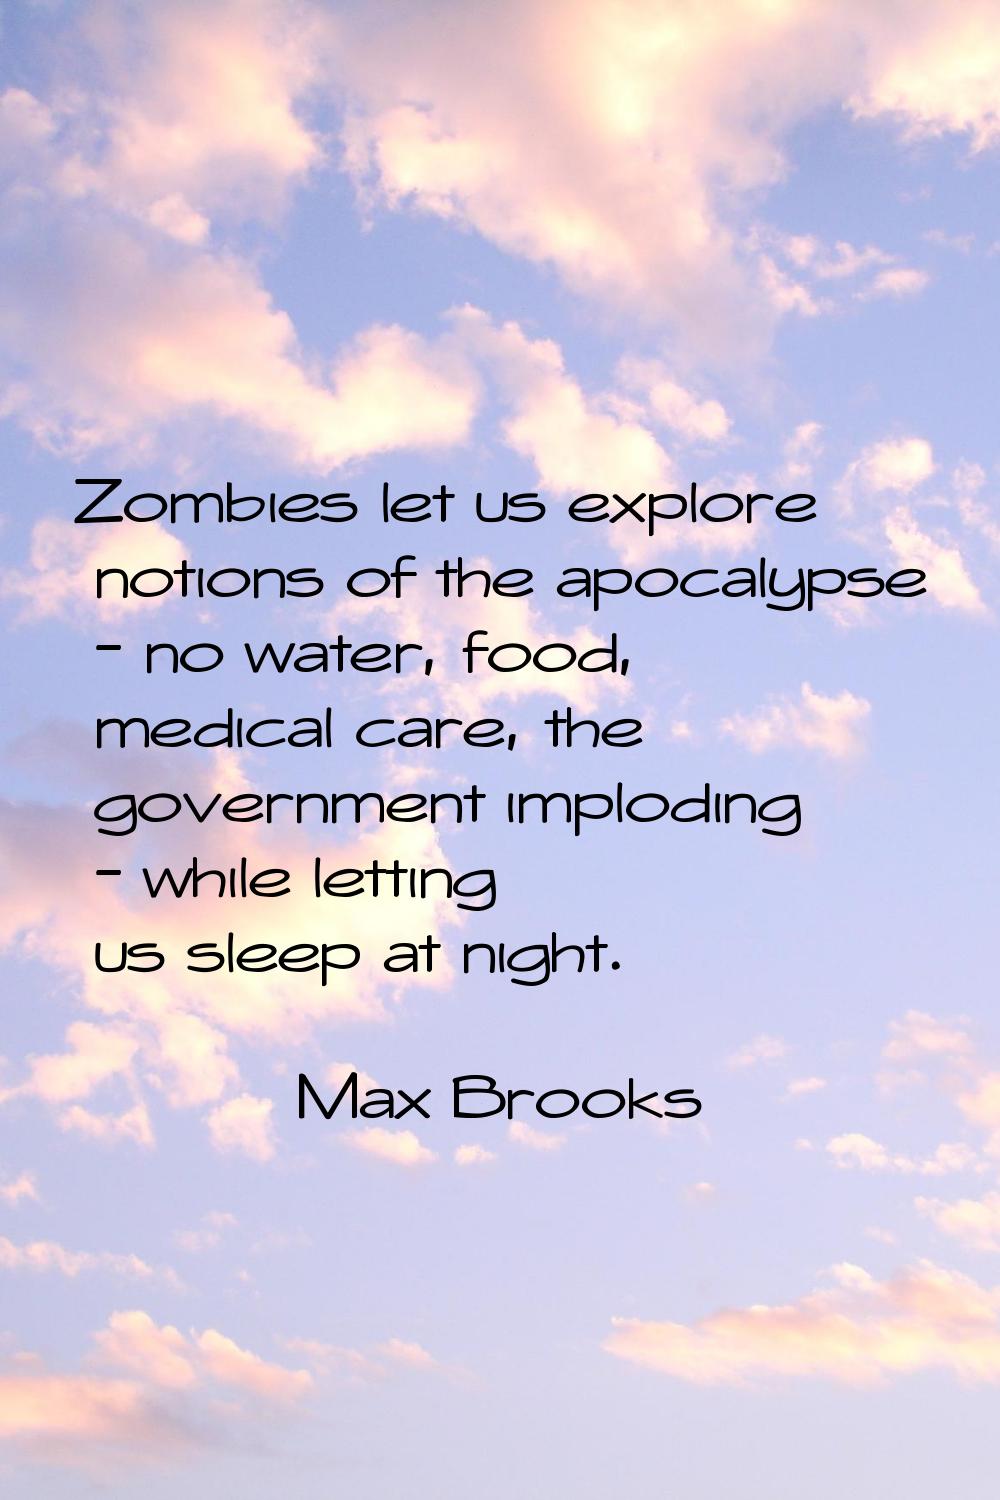 Zombies let us explore notions of the apocalypse - no water, food, medical care, the government imp